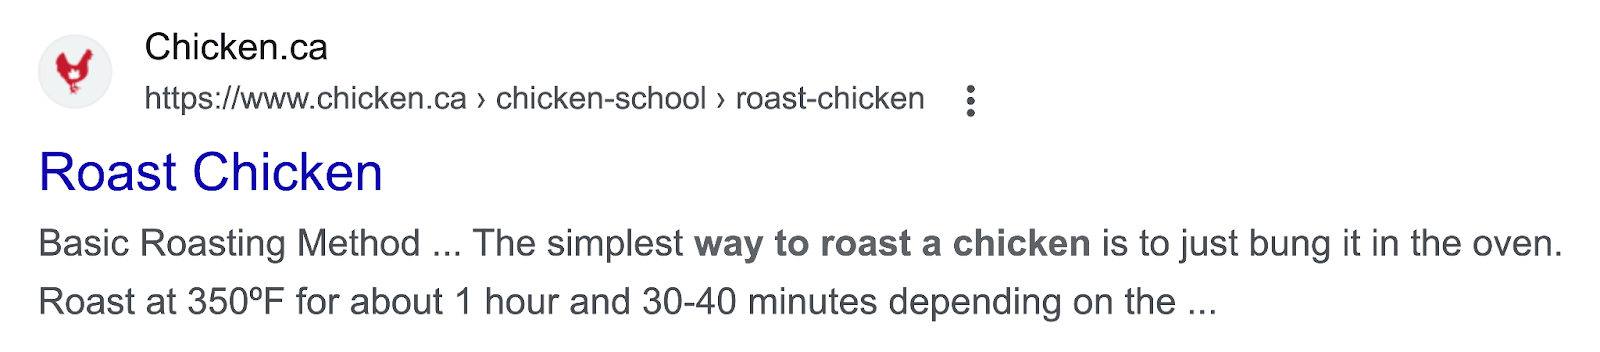 an example of a typical search listing for "Chicken.ca"